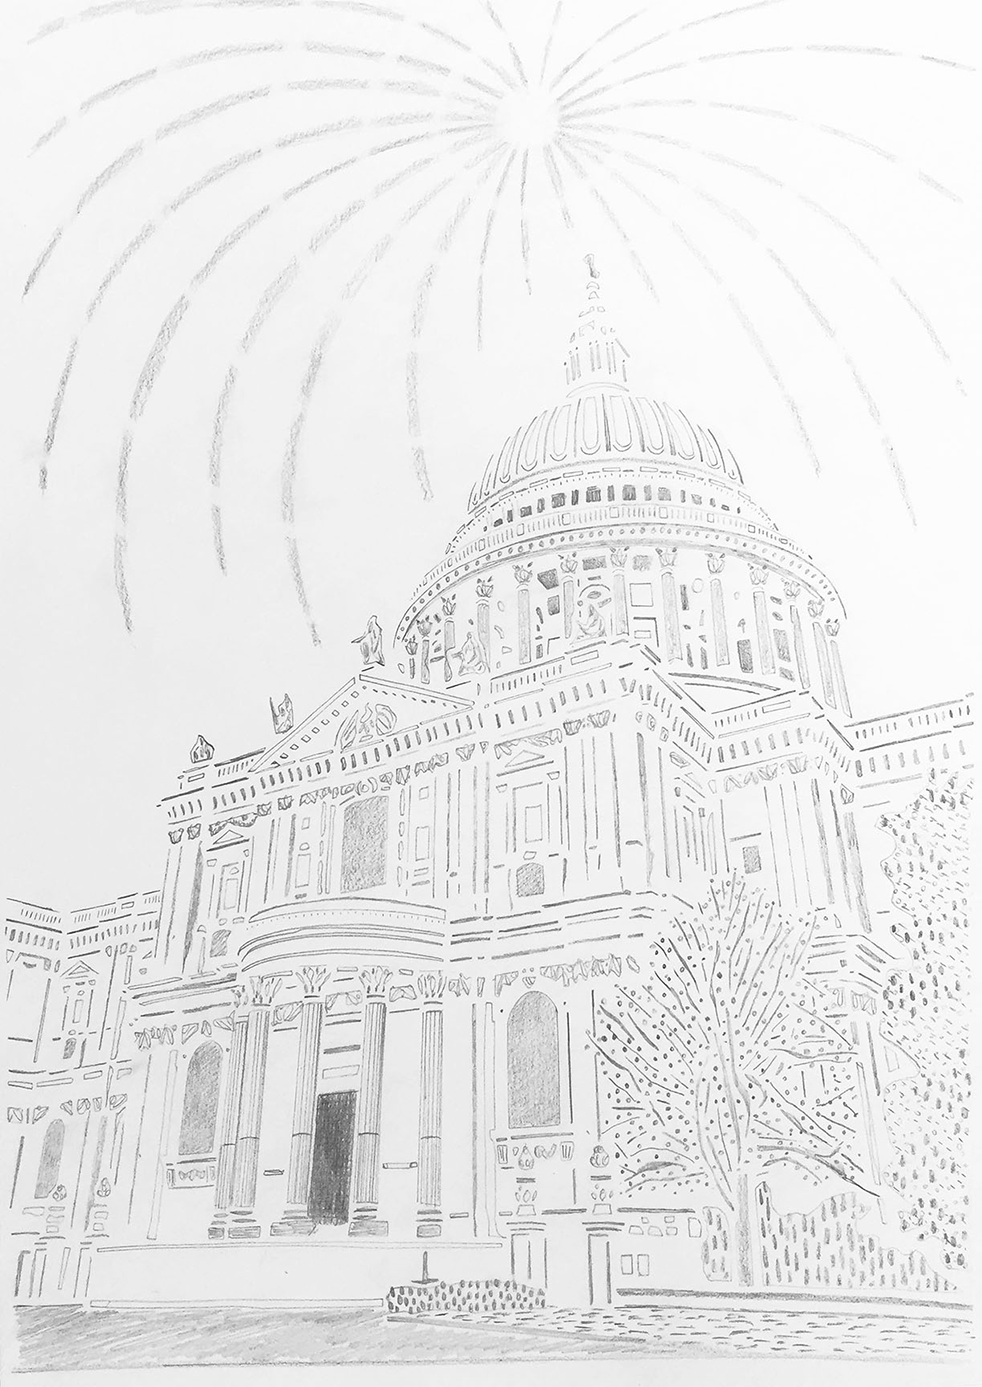 The South Elevation of St Paul's Cathedral_29.7x42_PencilOnPaper.png